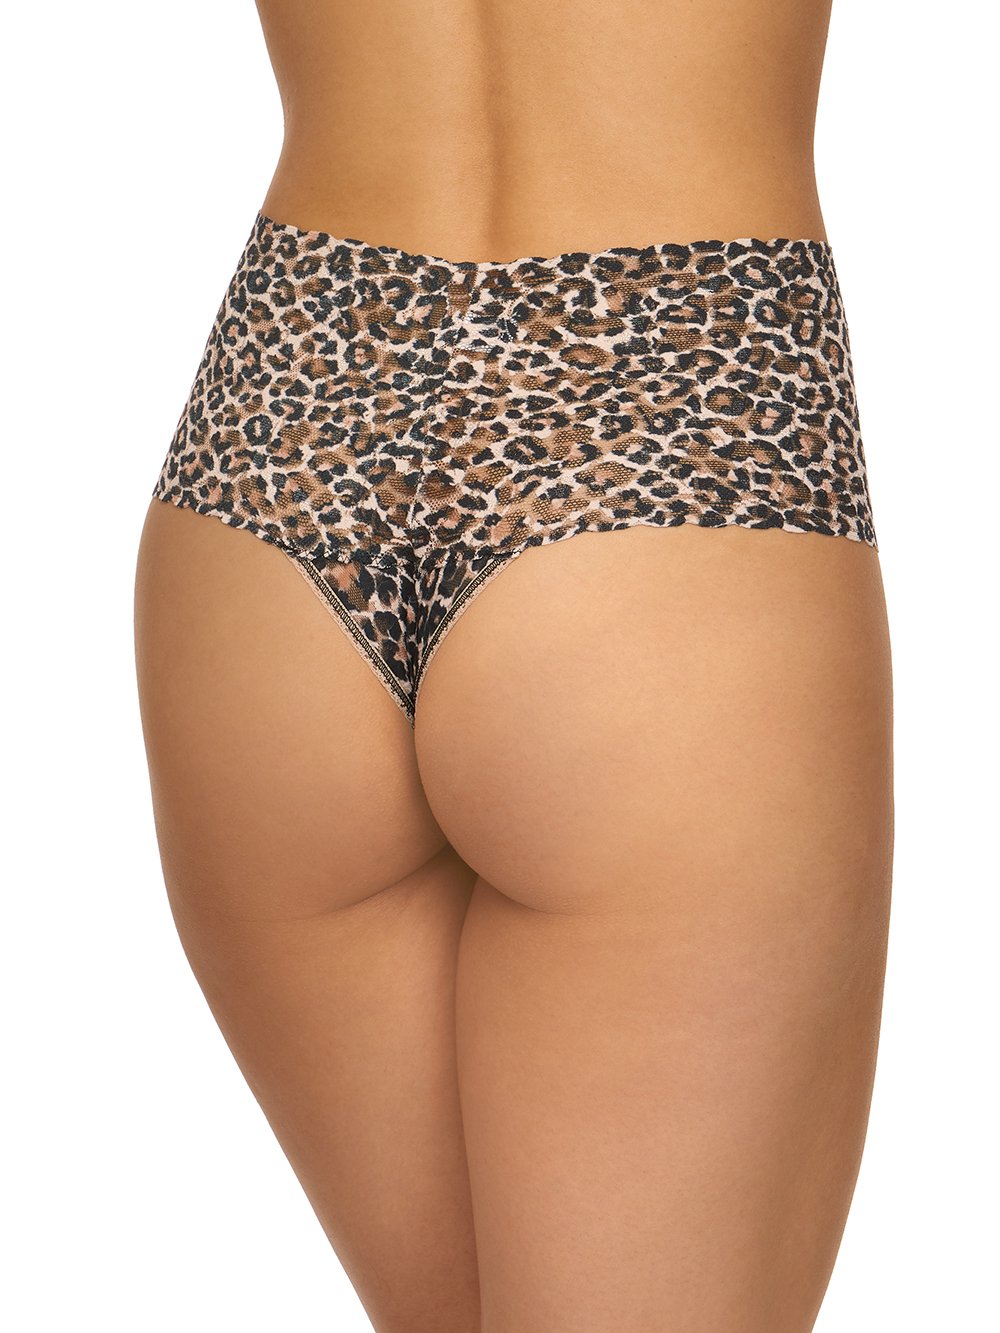 Hanky Panky Thong Brown Blk / One Size Classic Leopard *Plus Size* Retro Thong